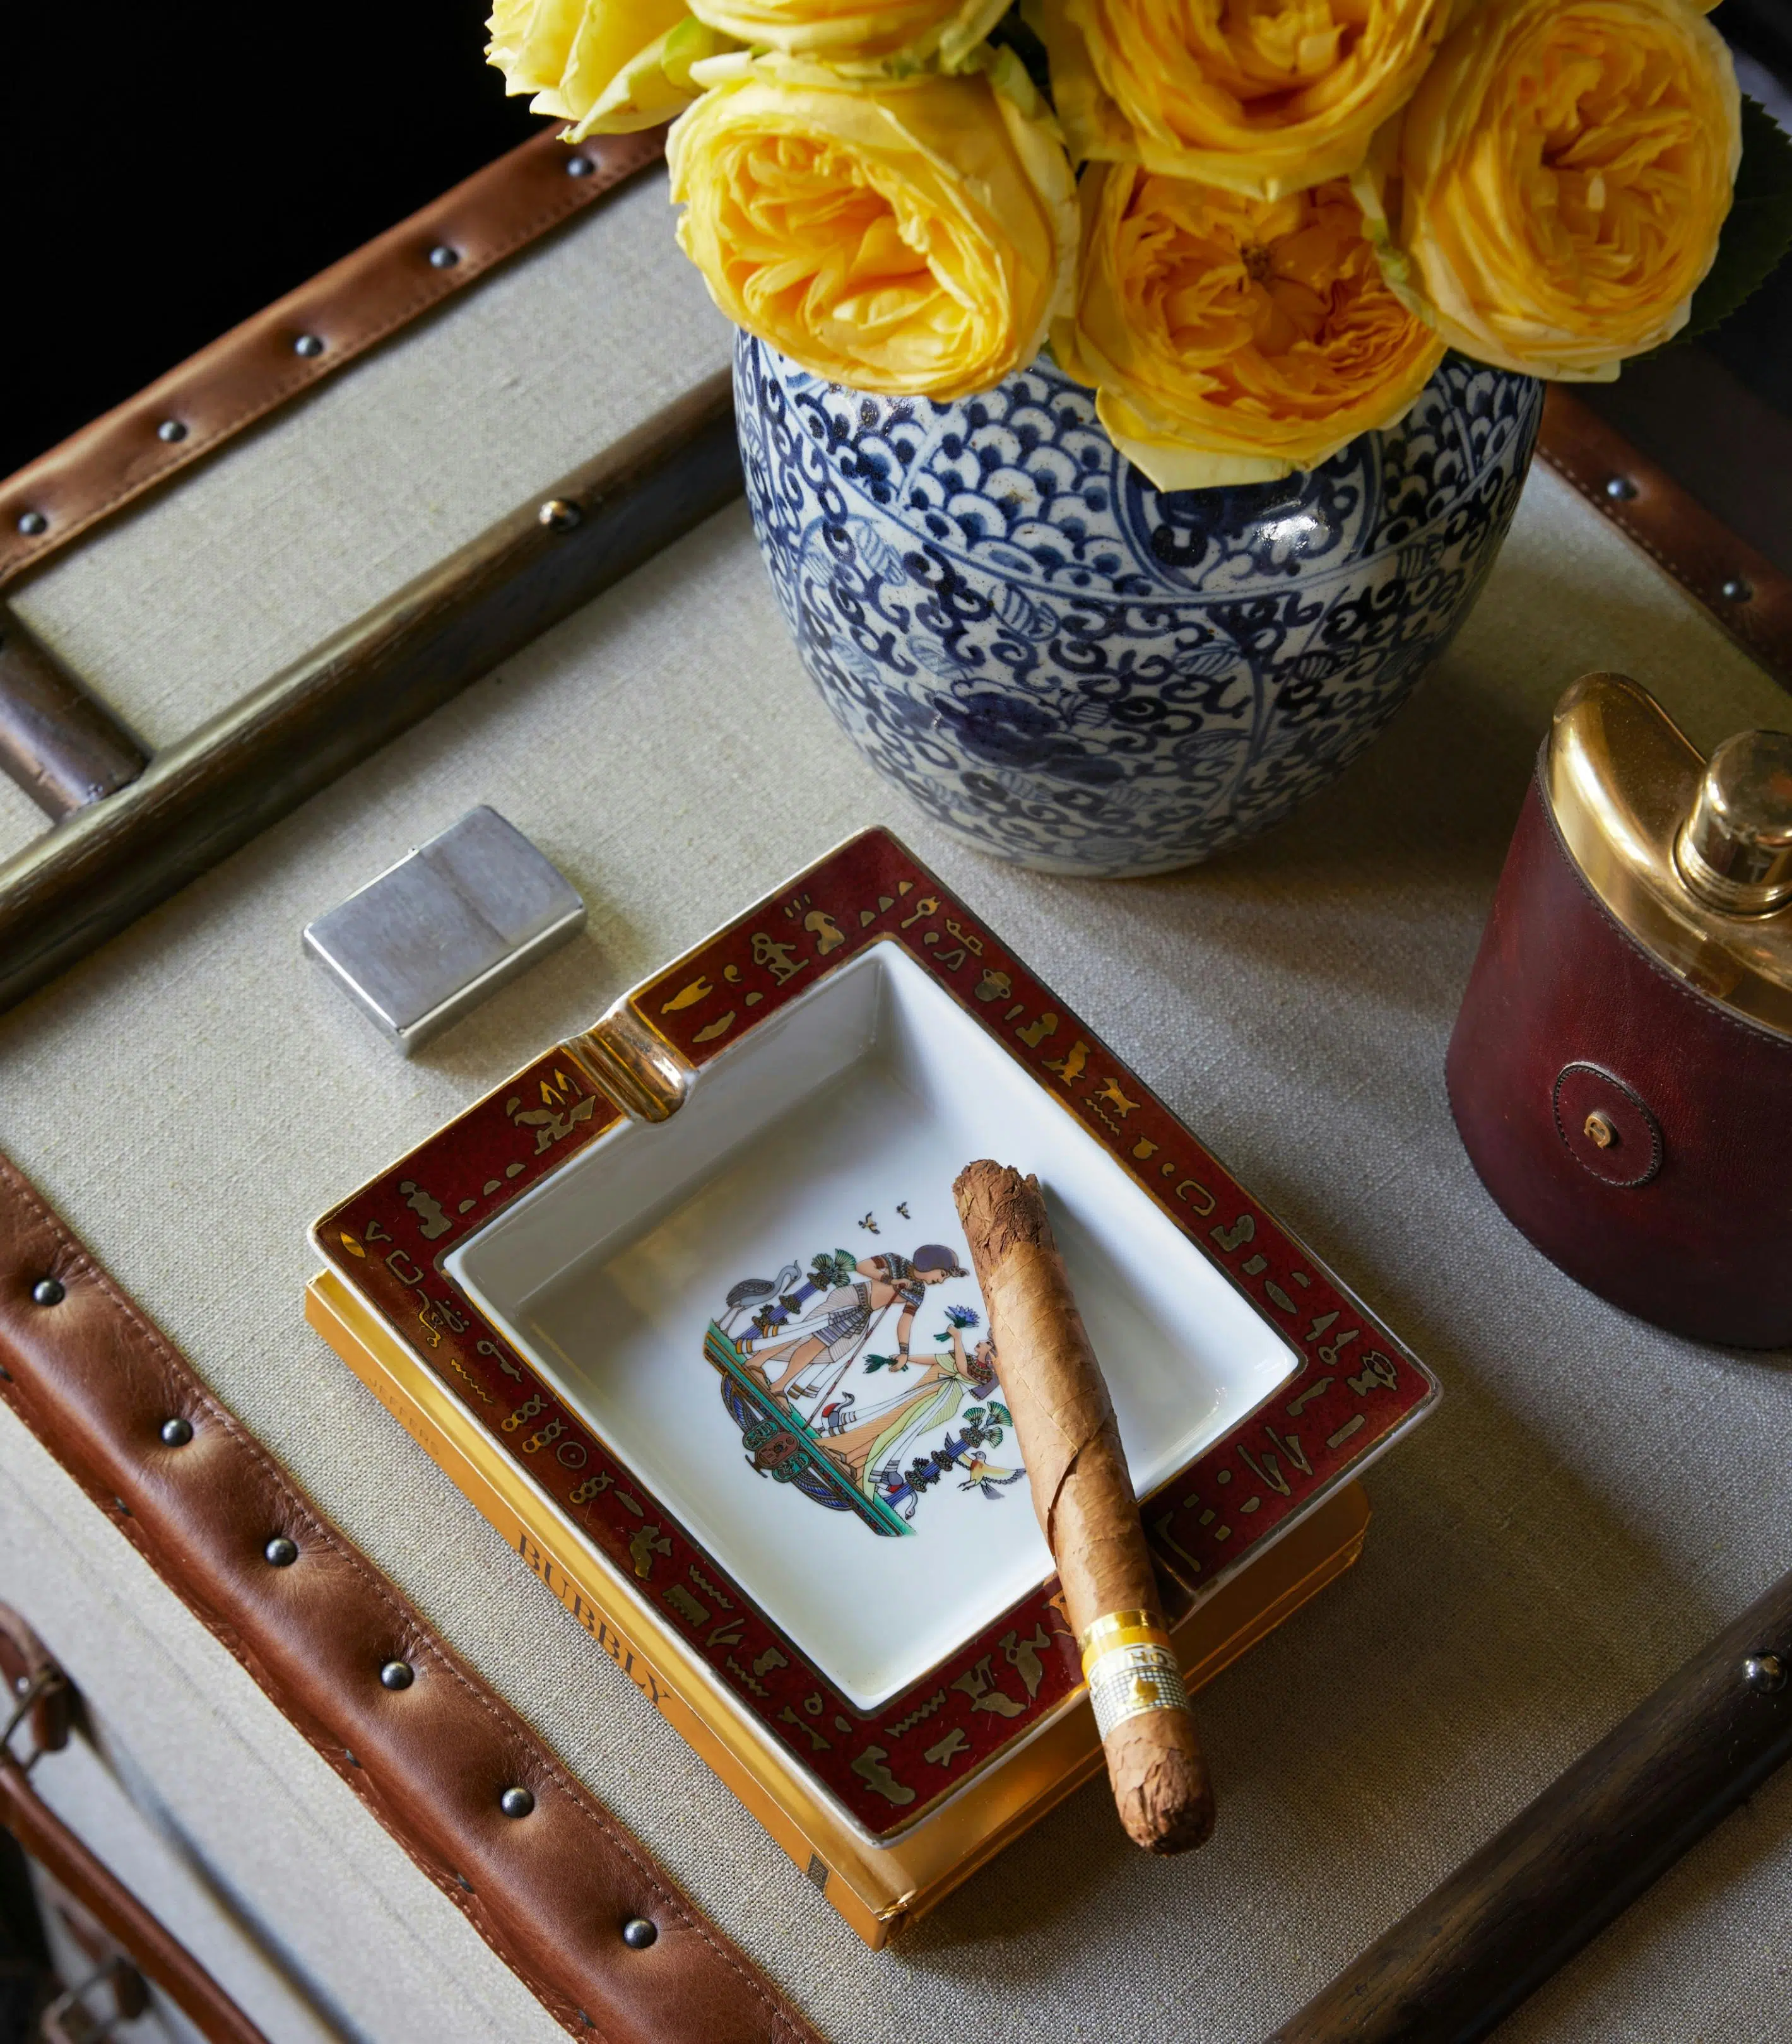 A close-up of a cigar in a square ashtray with a red frame, metallic details and a central image that looks like Egyptian art. Around the ashtray are a hip flask, Zippo lighter and a blue-and-white vase holding yellow flowers